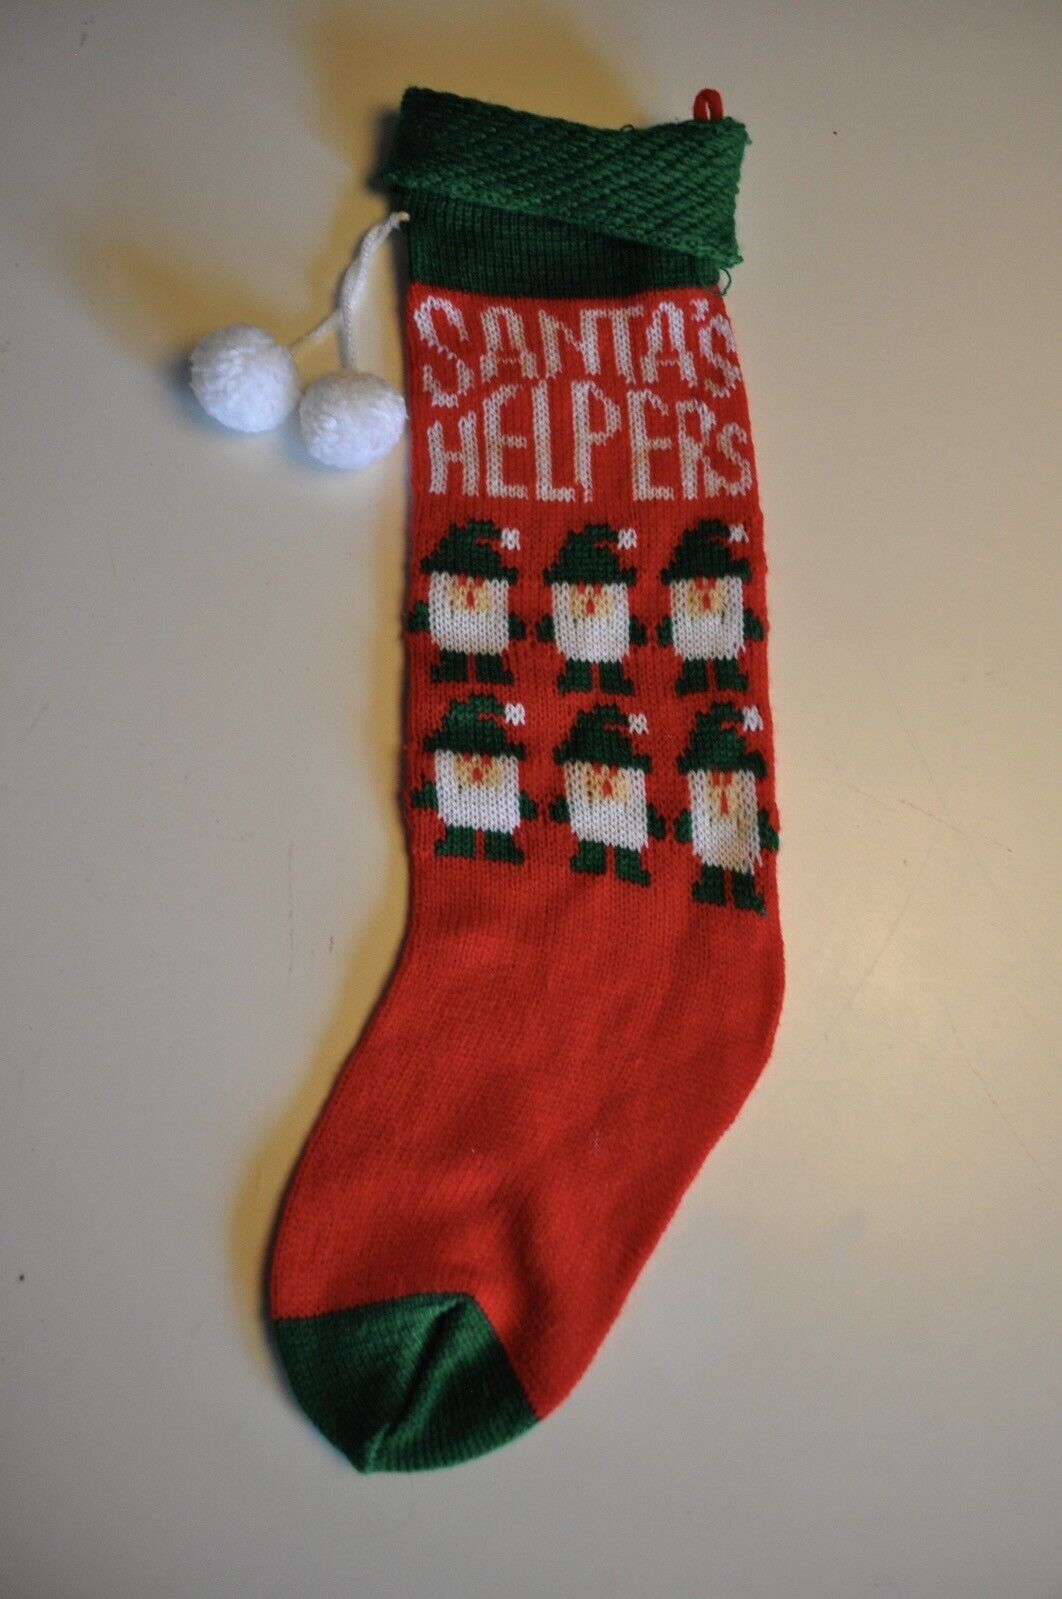 Vintage Christmas Stocking Santa’s Helpers Unbranded Red White Green